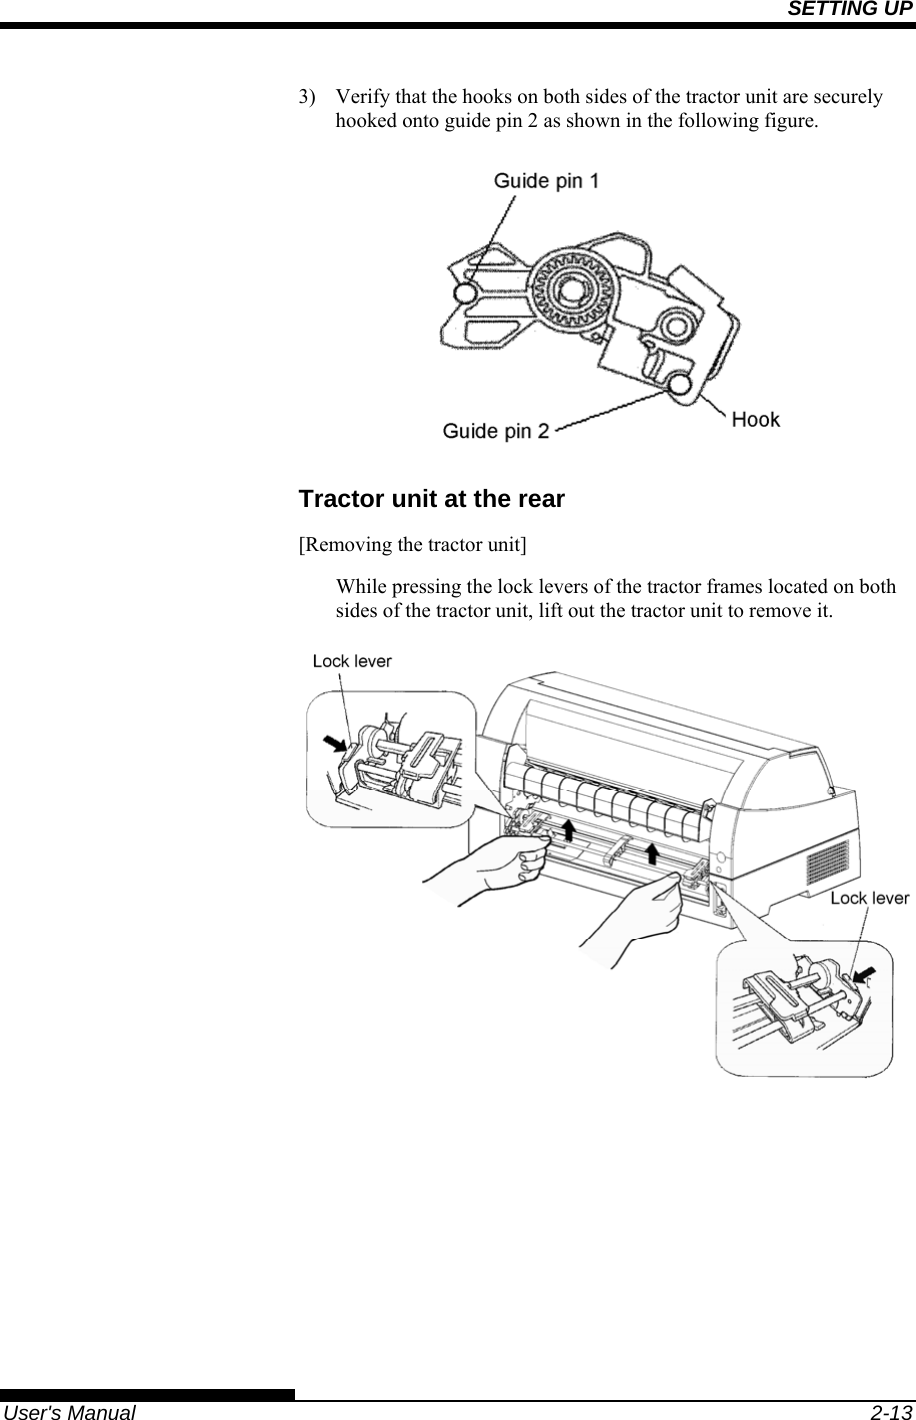 SETTING UP   User&apos;s Manual  2-13 3)  Verify that the hooks on both sides of the tractor unit are securely hooked onto guide pin 2 as shown in the following figure.  Tractor unit at the rear  [Removing the tractor unit] While pressing the lock levers of the tractor frames located on both sides of the tractor unit, lift out the tractor unit to remove it.  